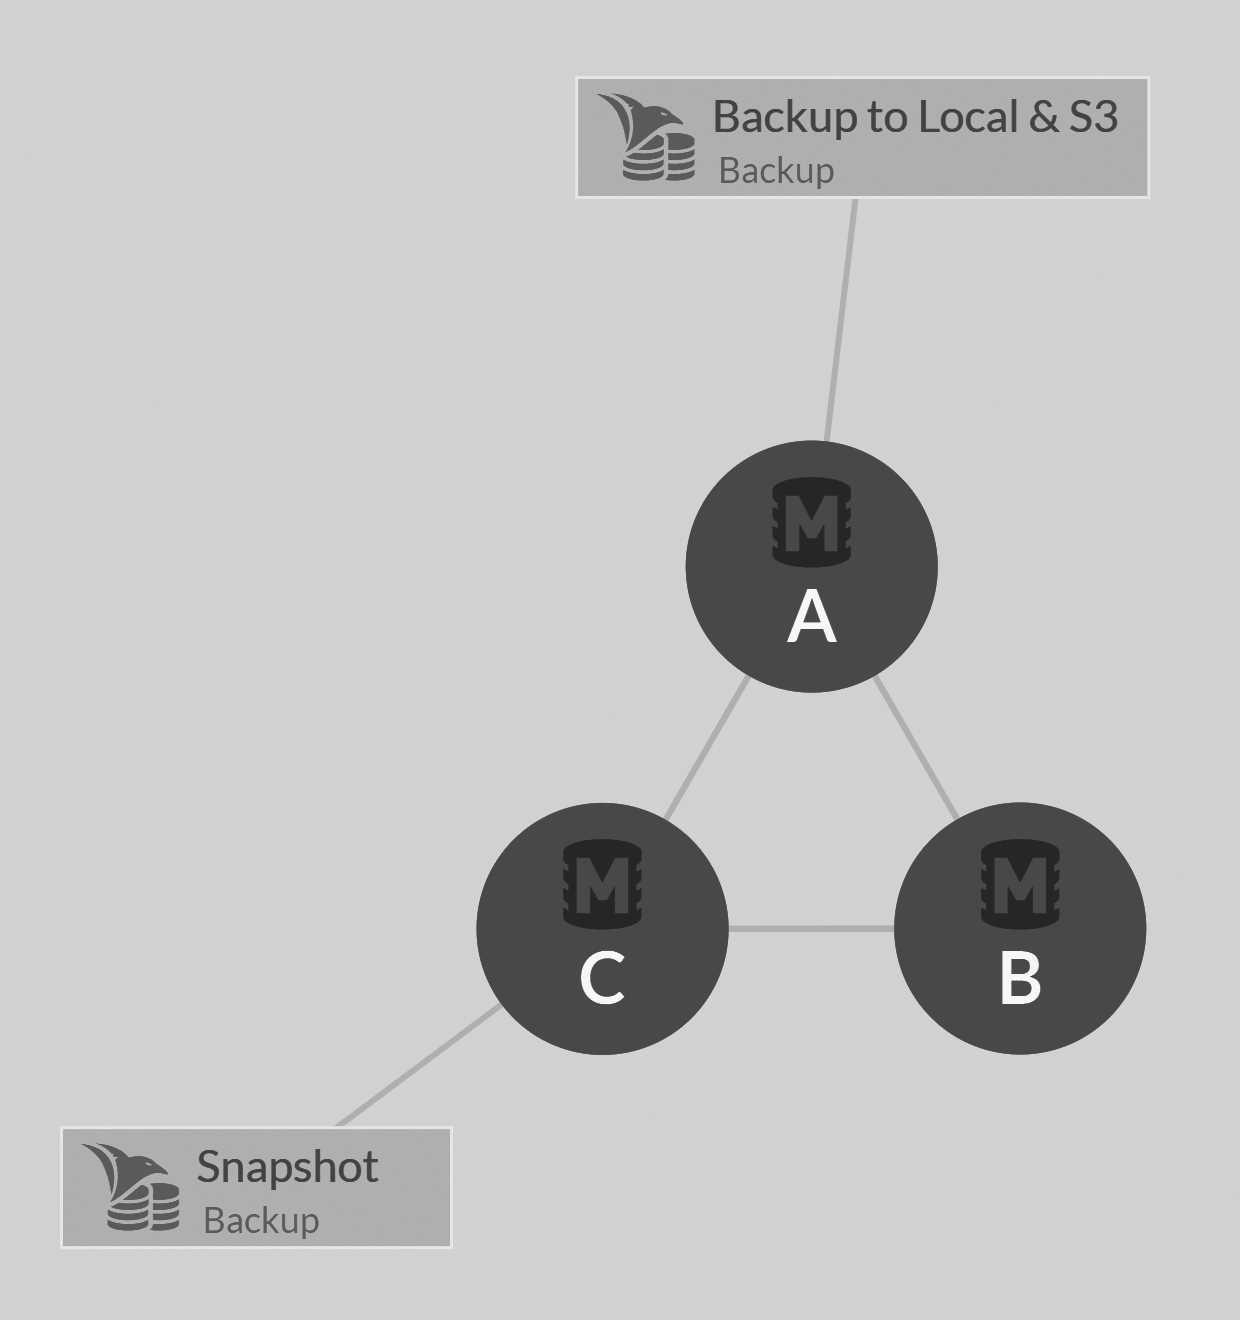 The backup tasks are automatically distributed between the nodes in the database group